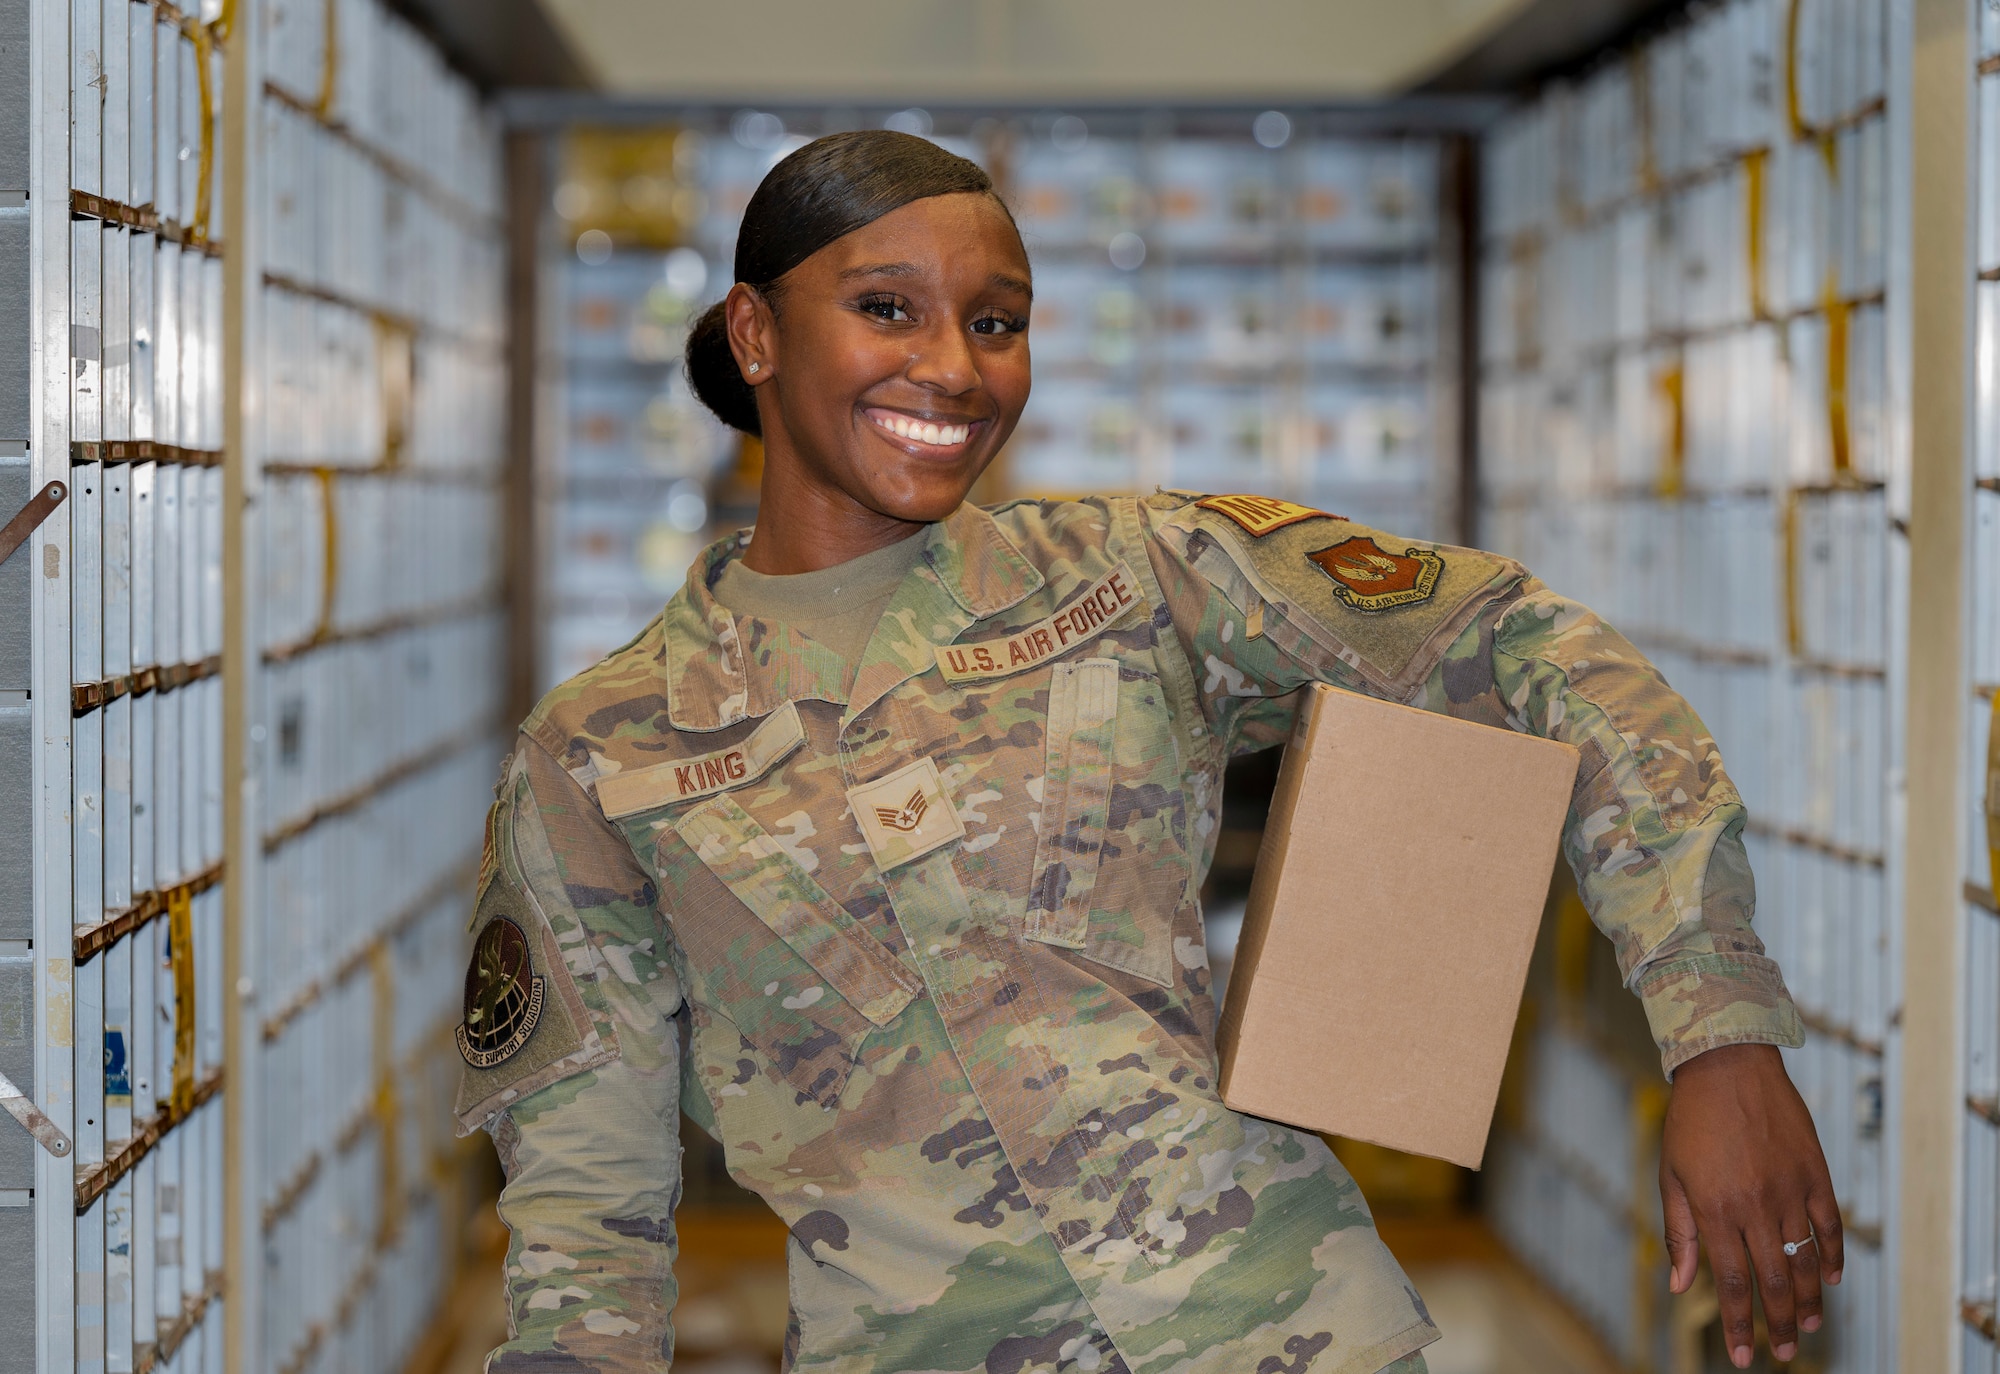 As the 2022 holiday season arrives, the Ramstein Air Base Post Offices prepare for war.
During the holidays, the post office team experiences a massive influx of packages shipped in and out of Ramstein AB.